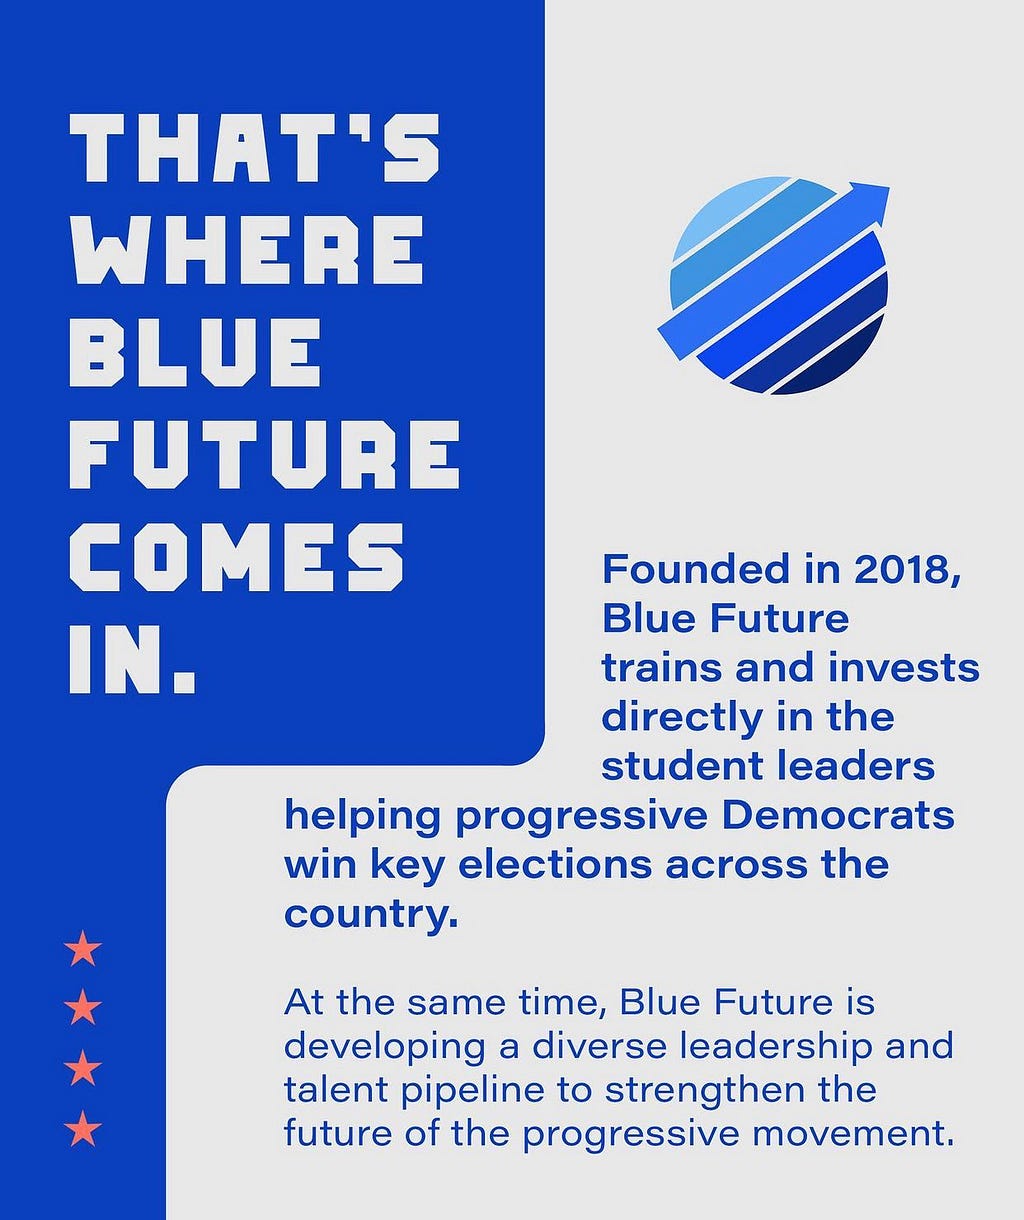 Blue Future graphic, reads “Founded in 2018, Blue Future trains and invests directly in the student leaders helping progressive Democrats win key elections across the country.”